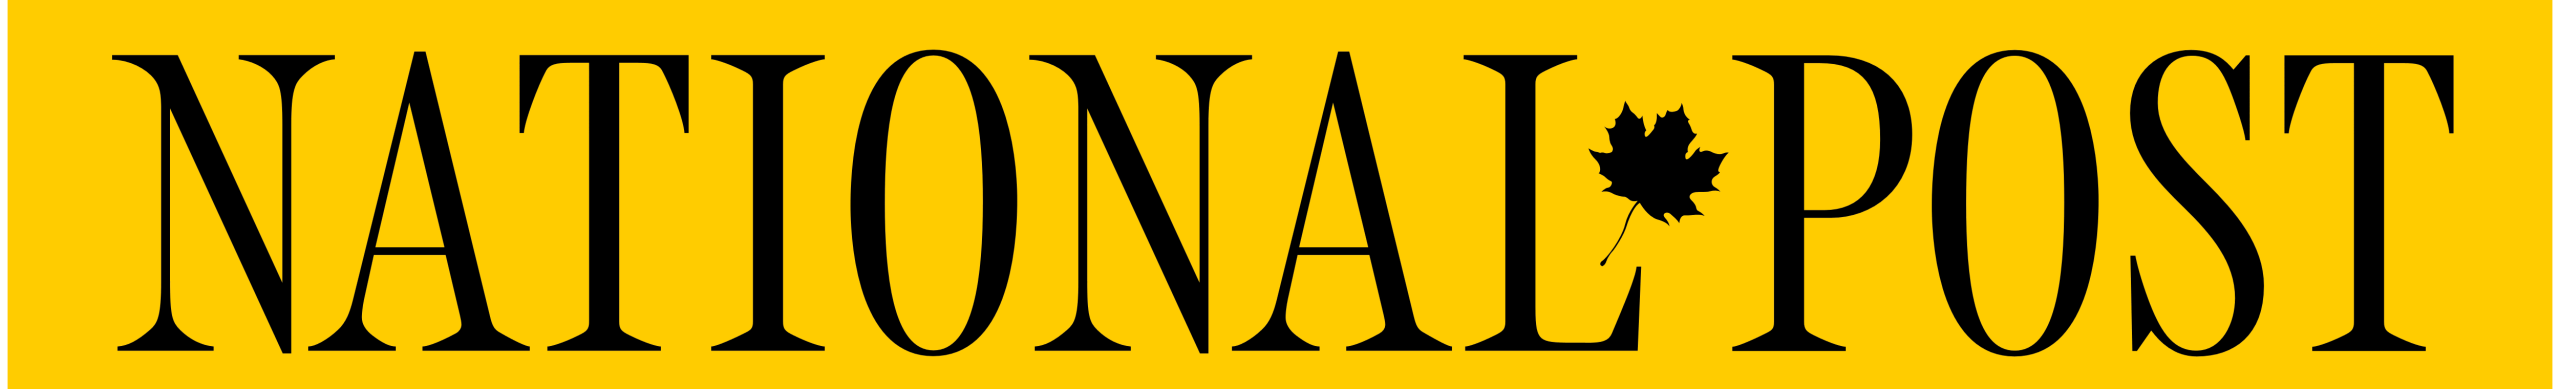 national post logo in black letters on yellow background